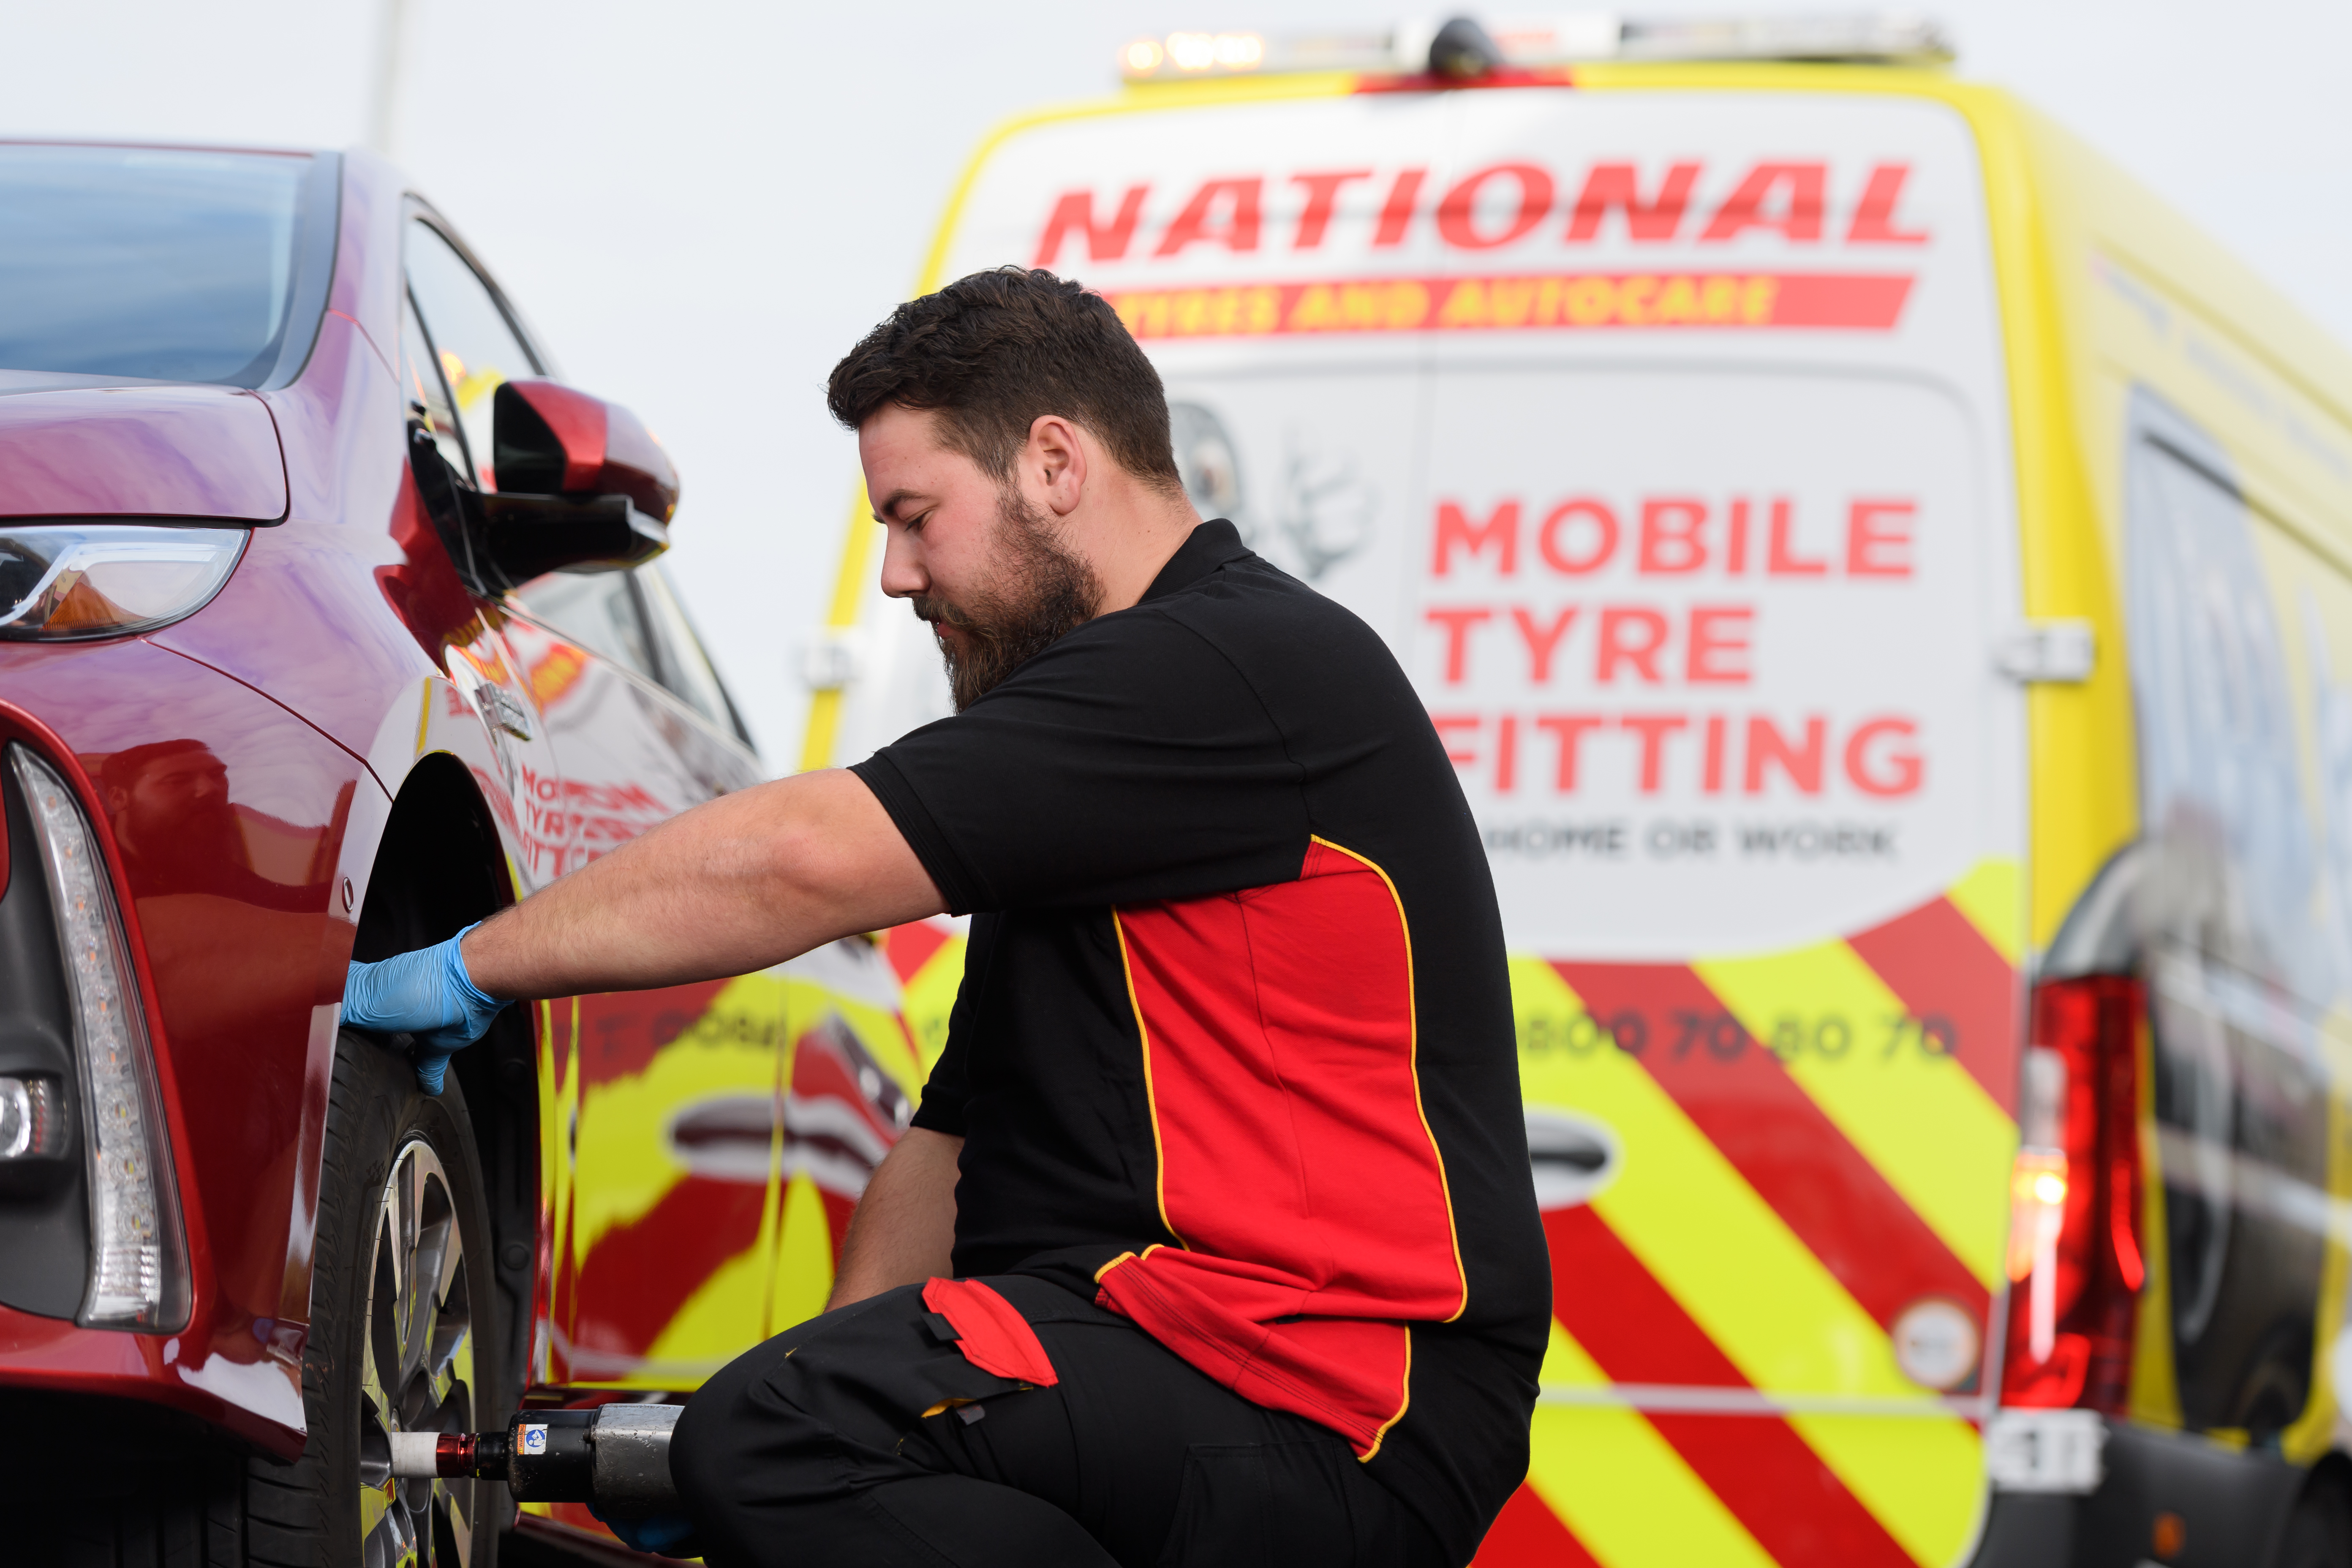 Halfords bought the owner of the National service garage business